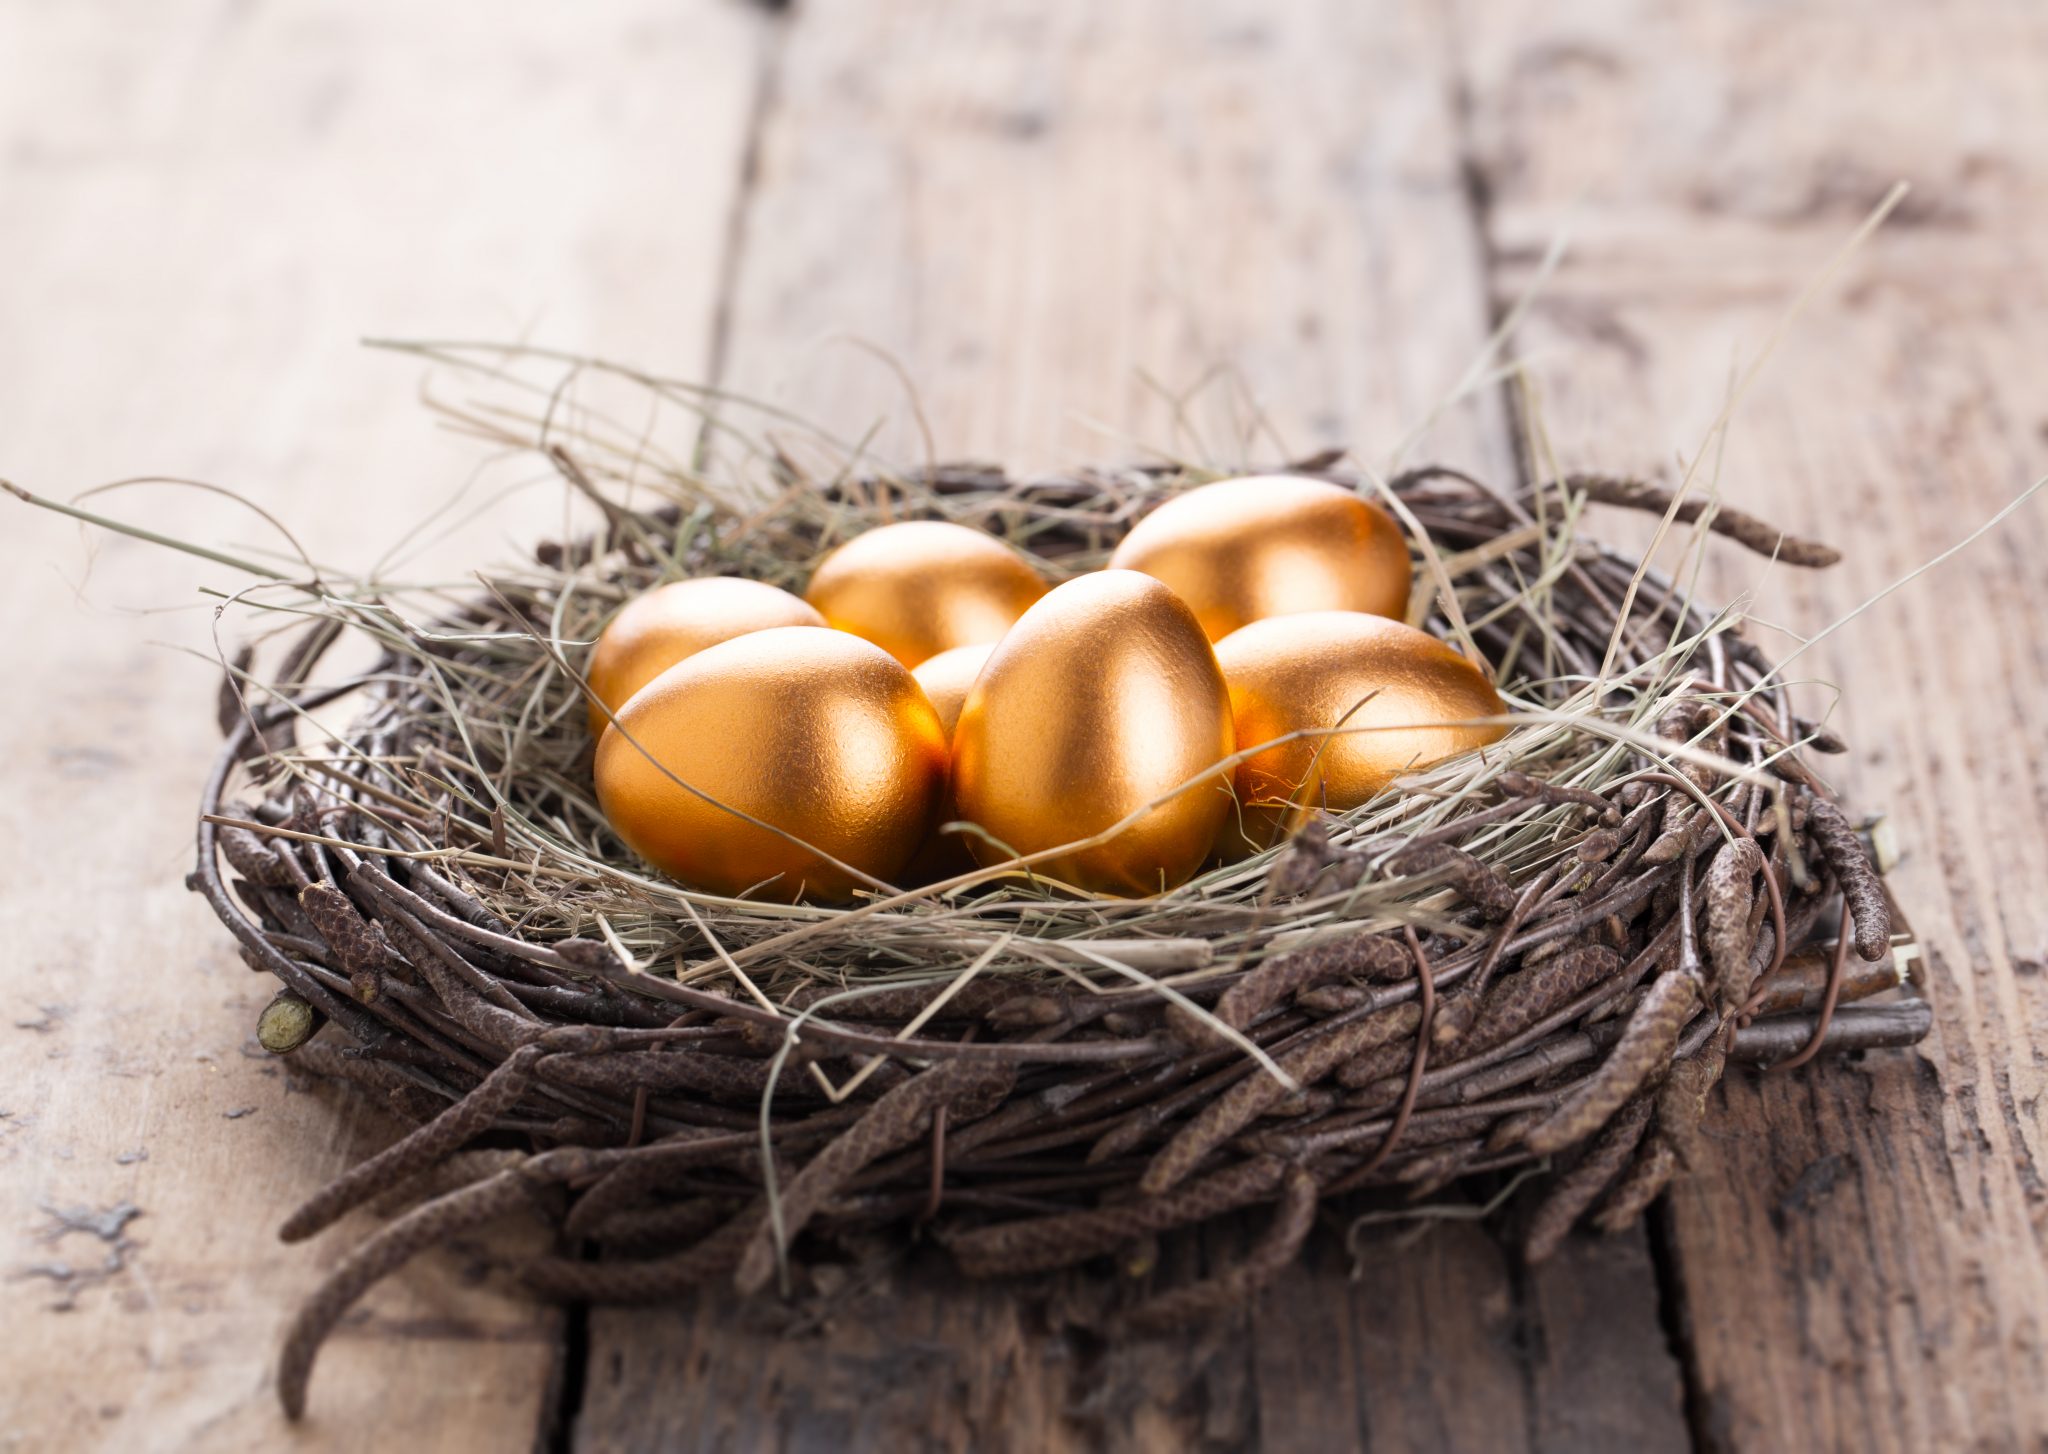 4% rule of retirement income from nest egg